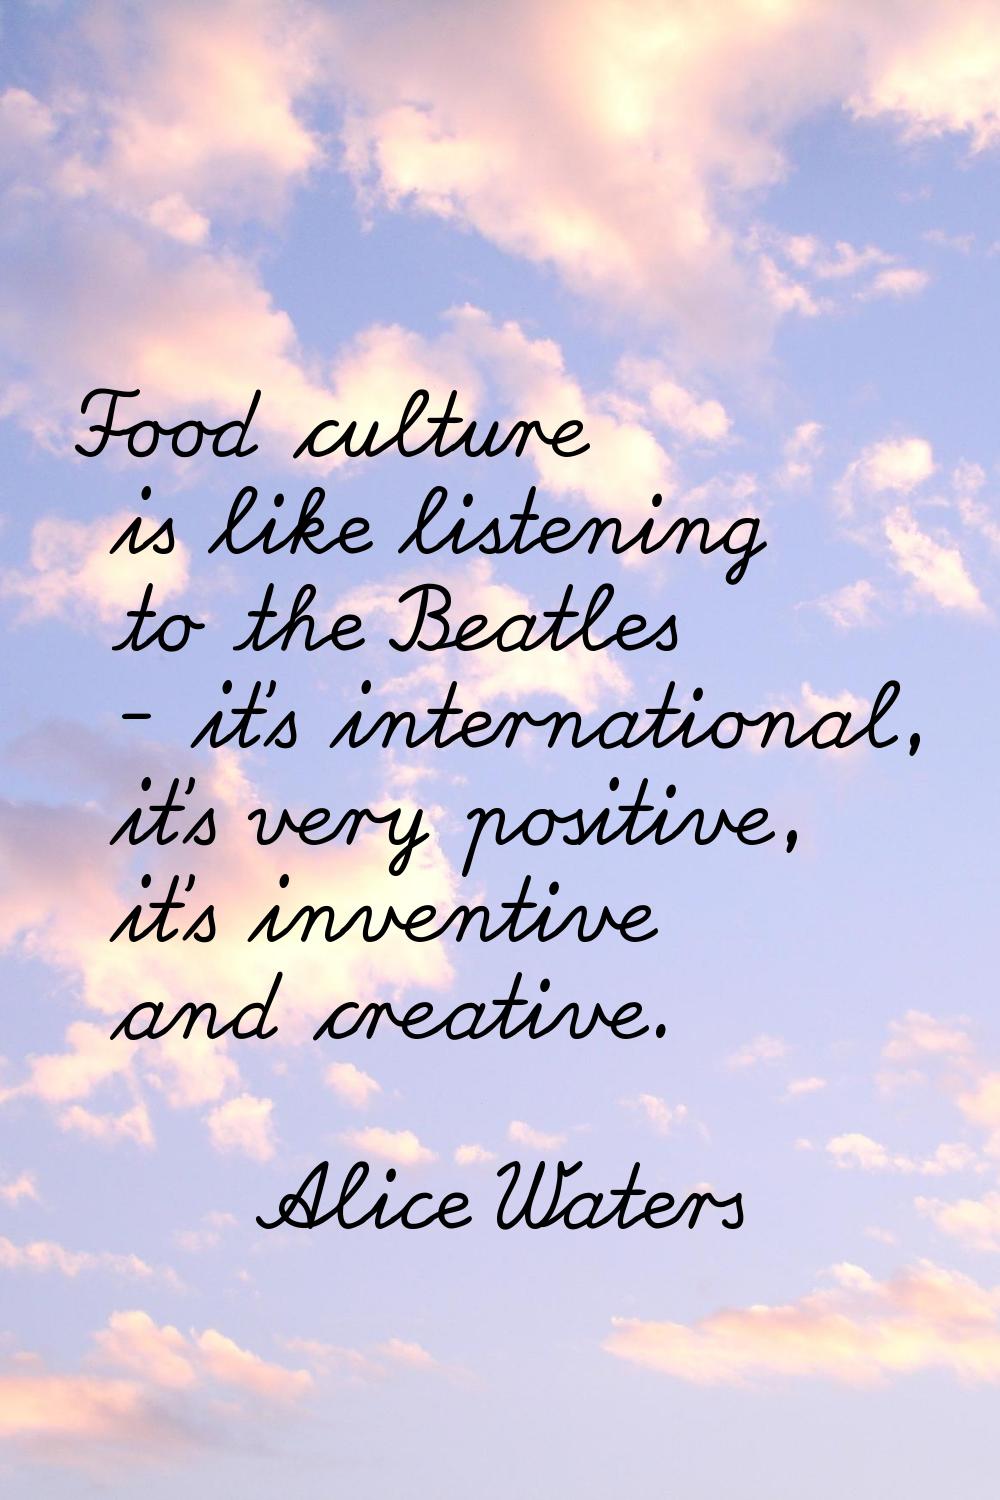 Food culture is like listening to the Beatles - it's international, it's very positive, it's invent